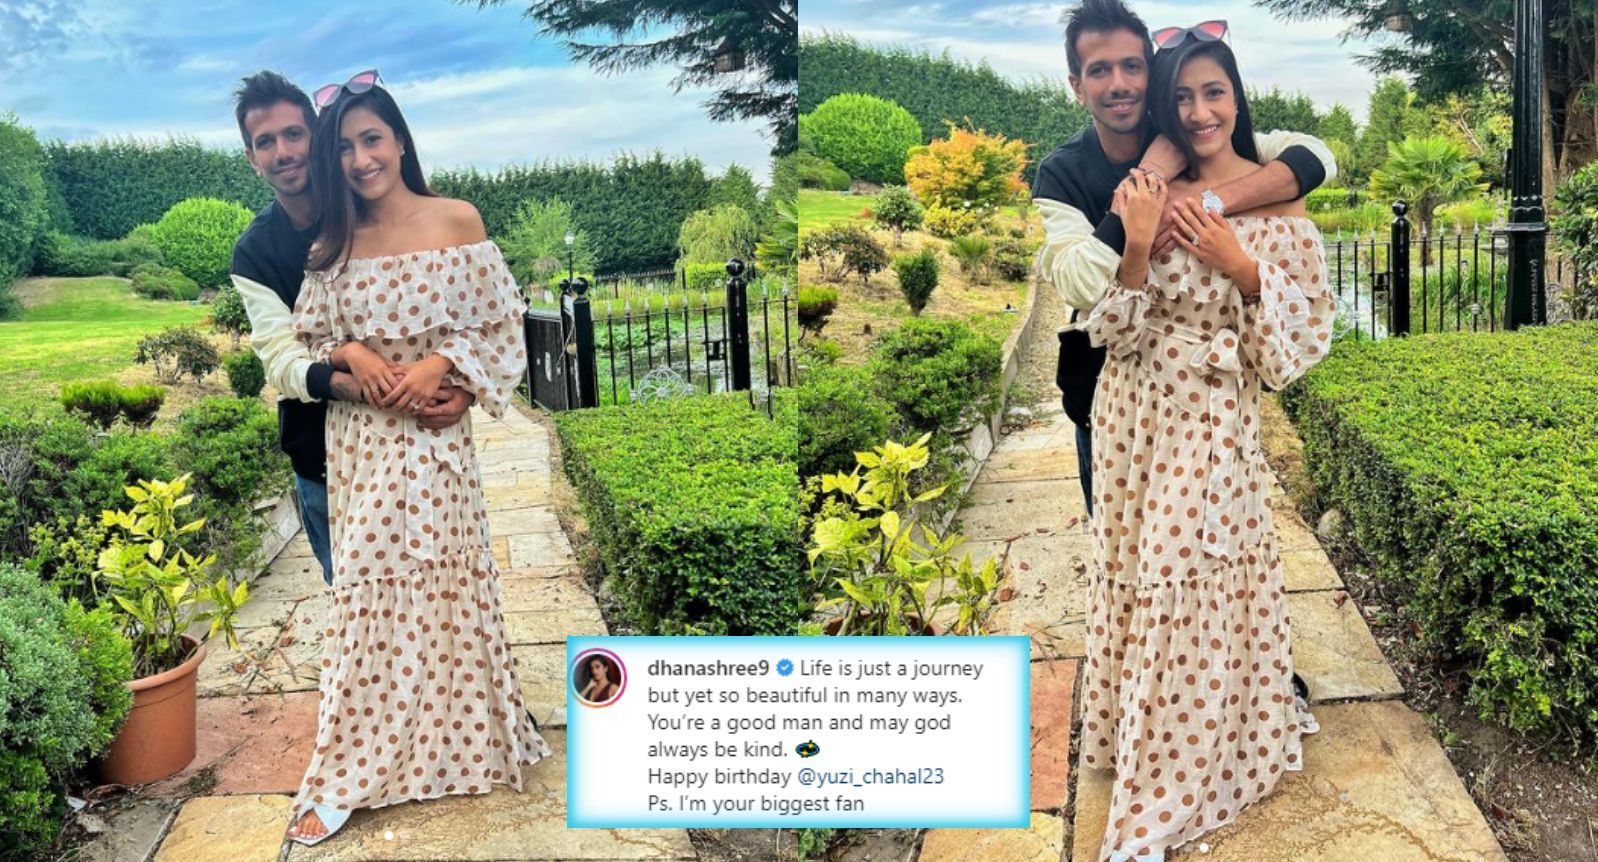 Dhanashree Verma wished Yuzvendra Chahal on his birthday with a special message on Instagram.